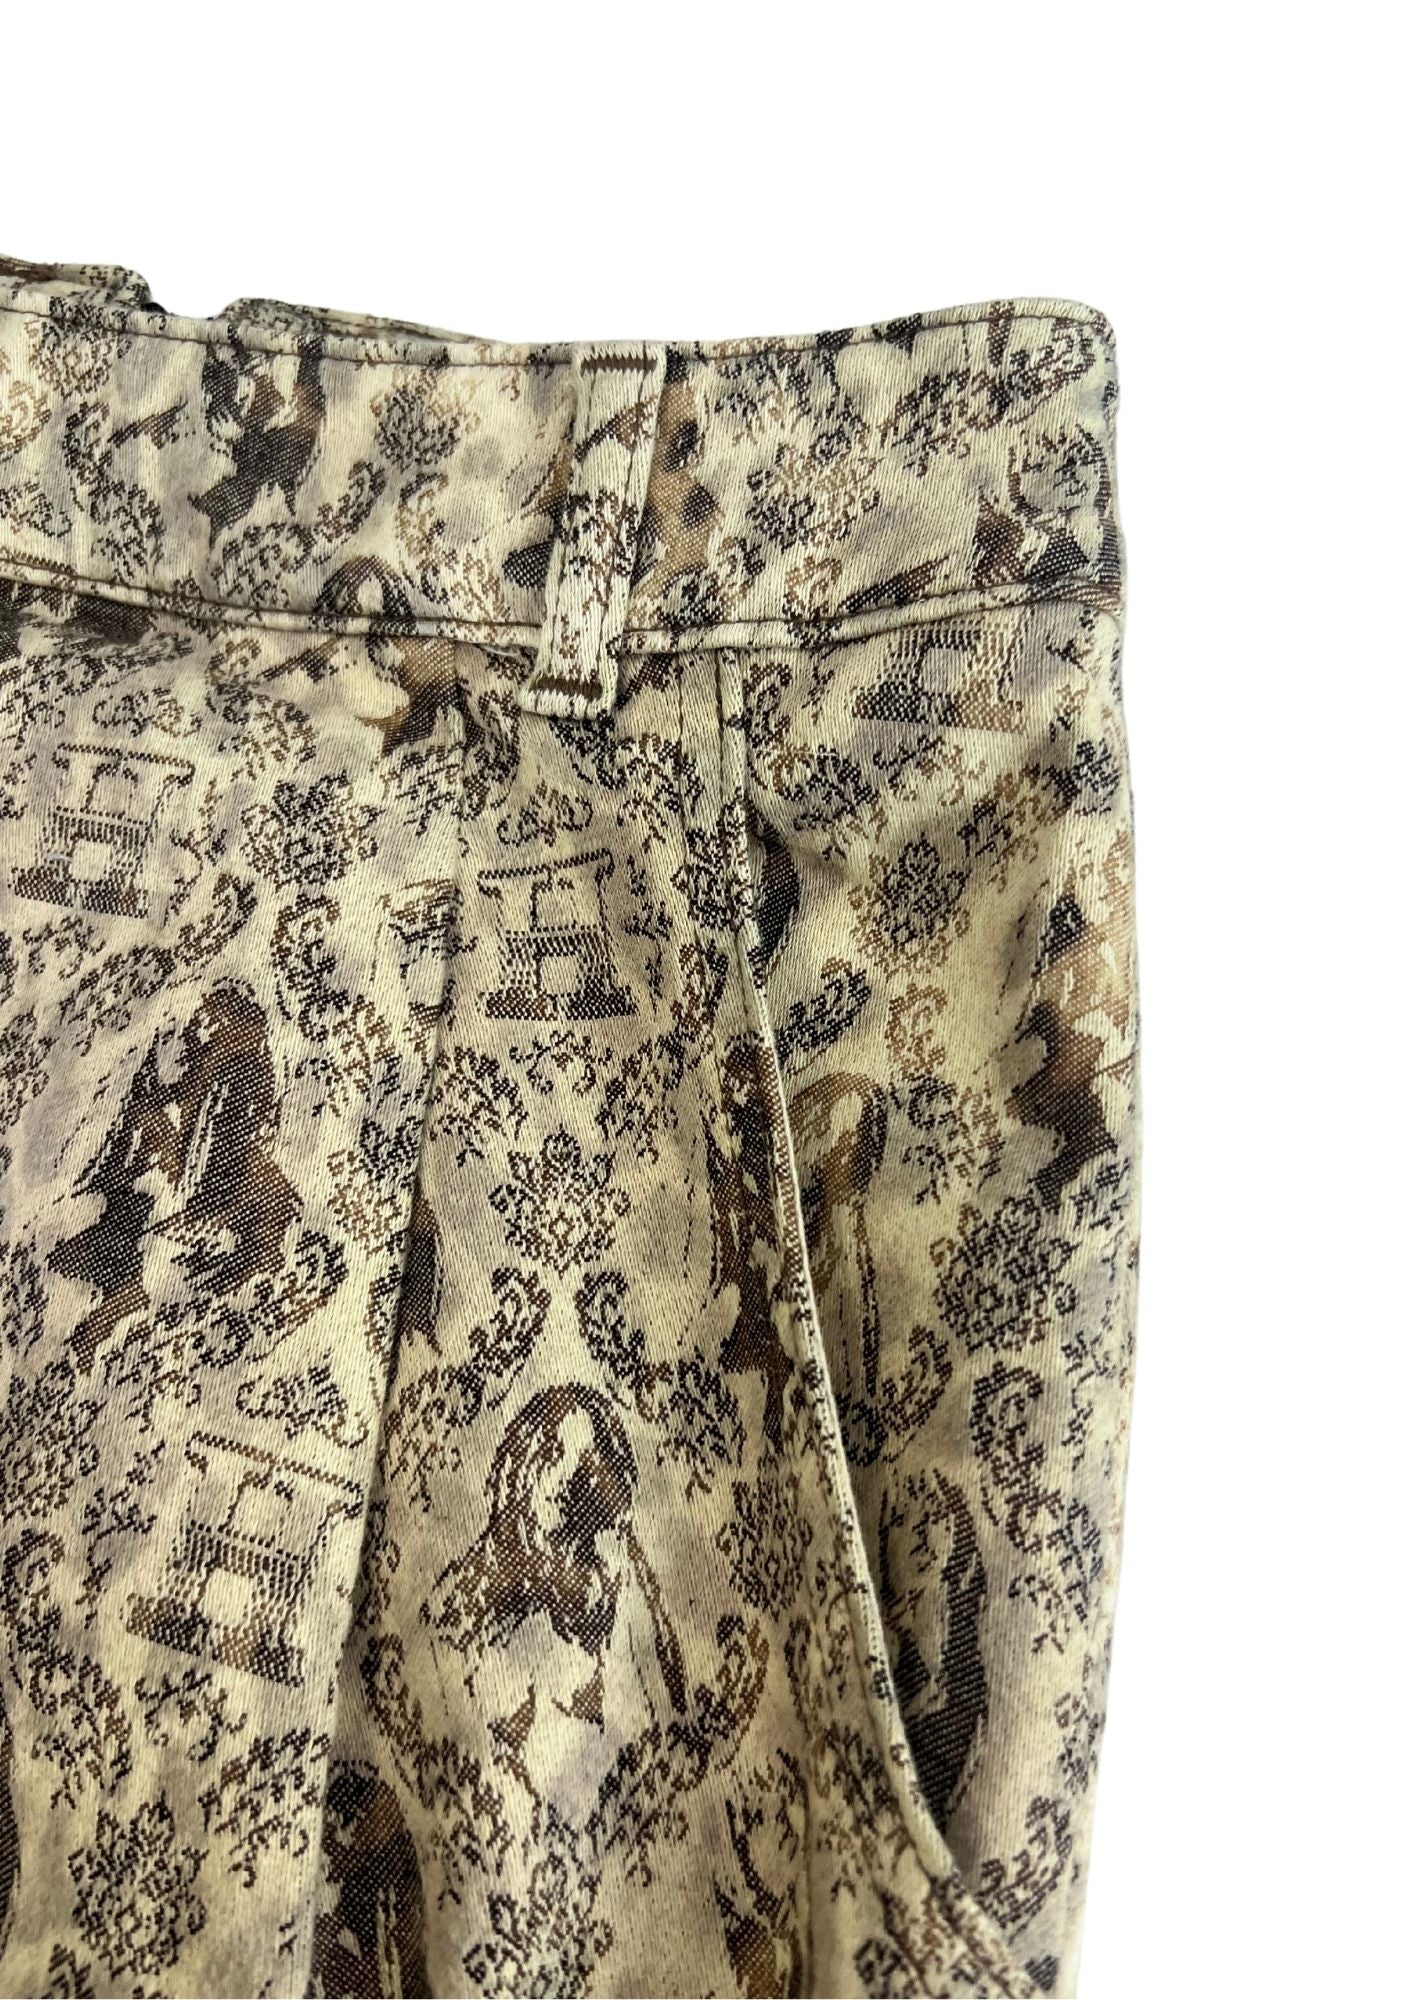 00s Hysteric Glamour Tulip Skirt